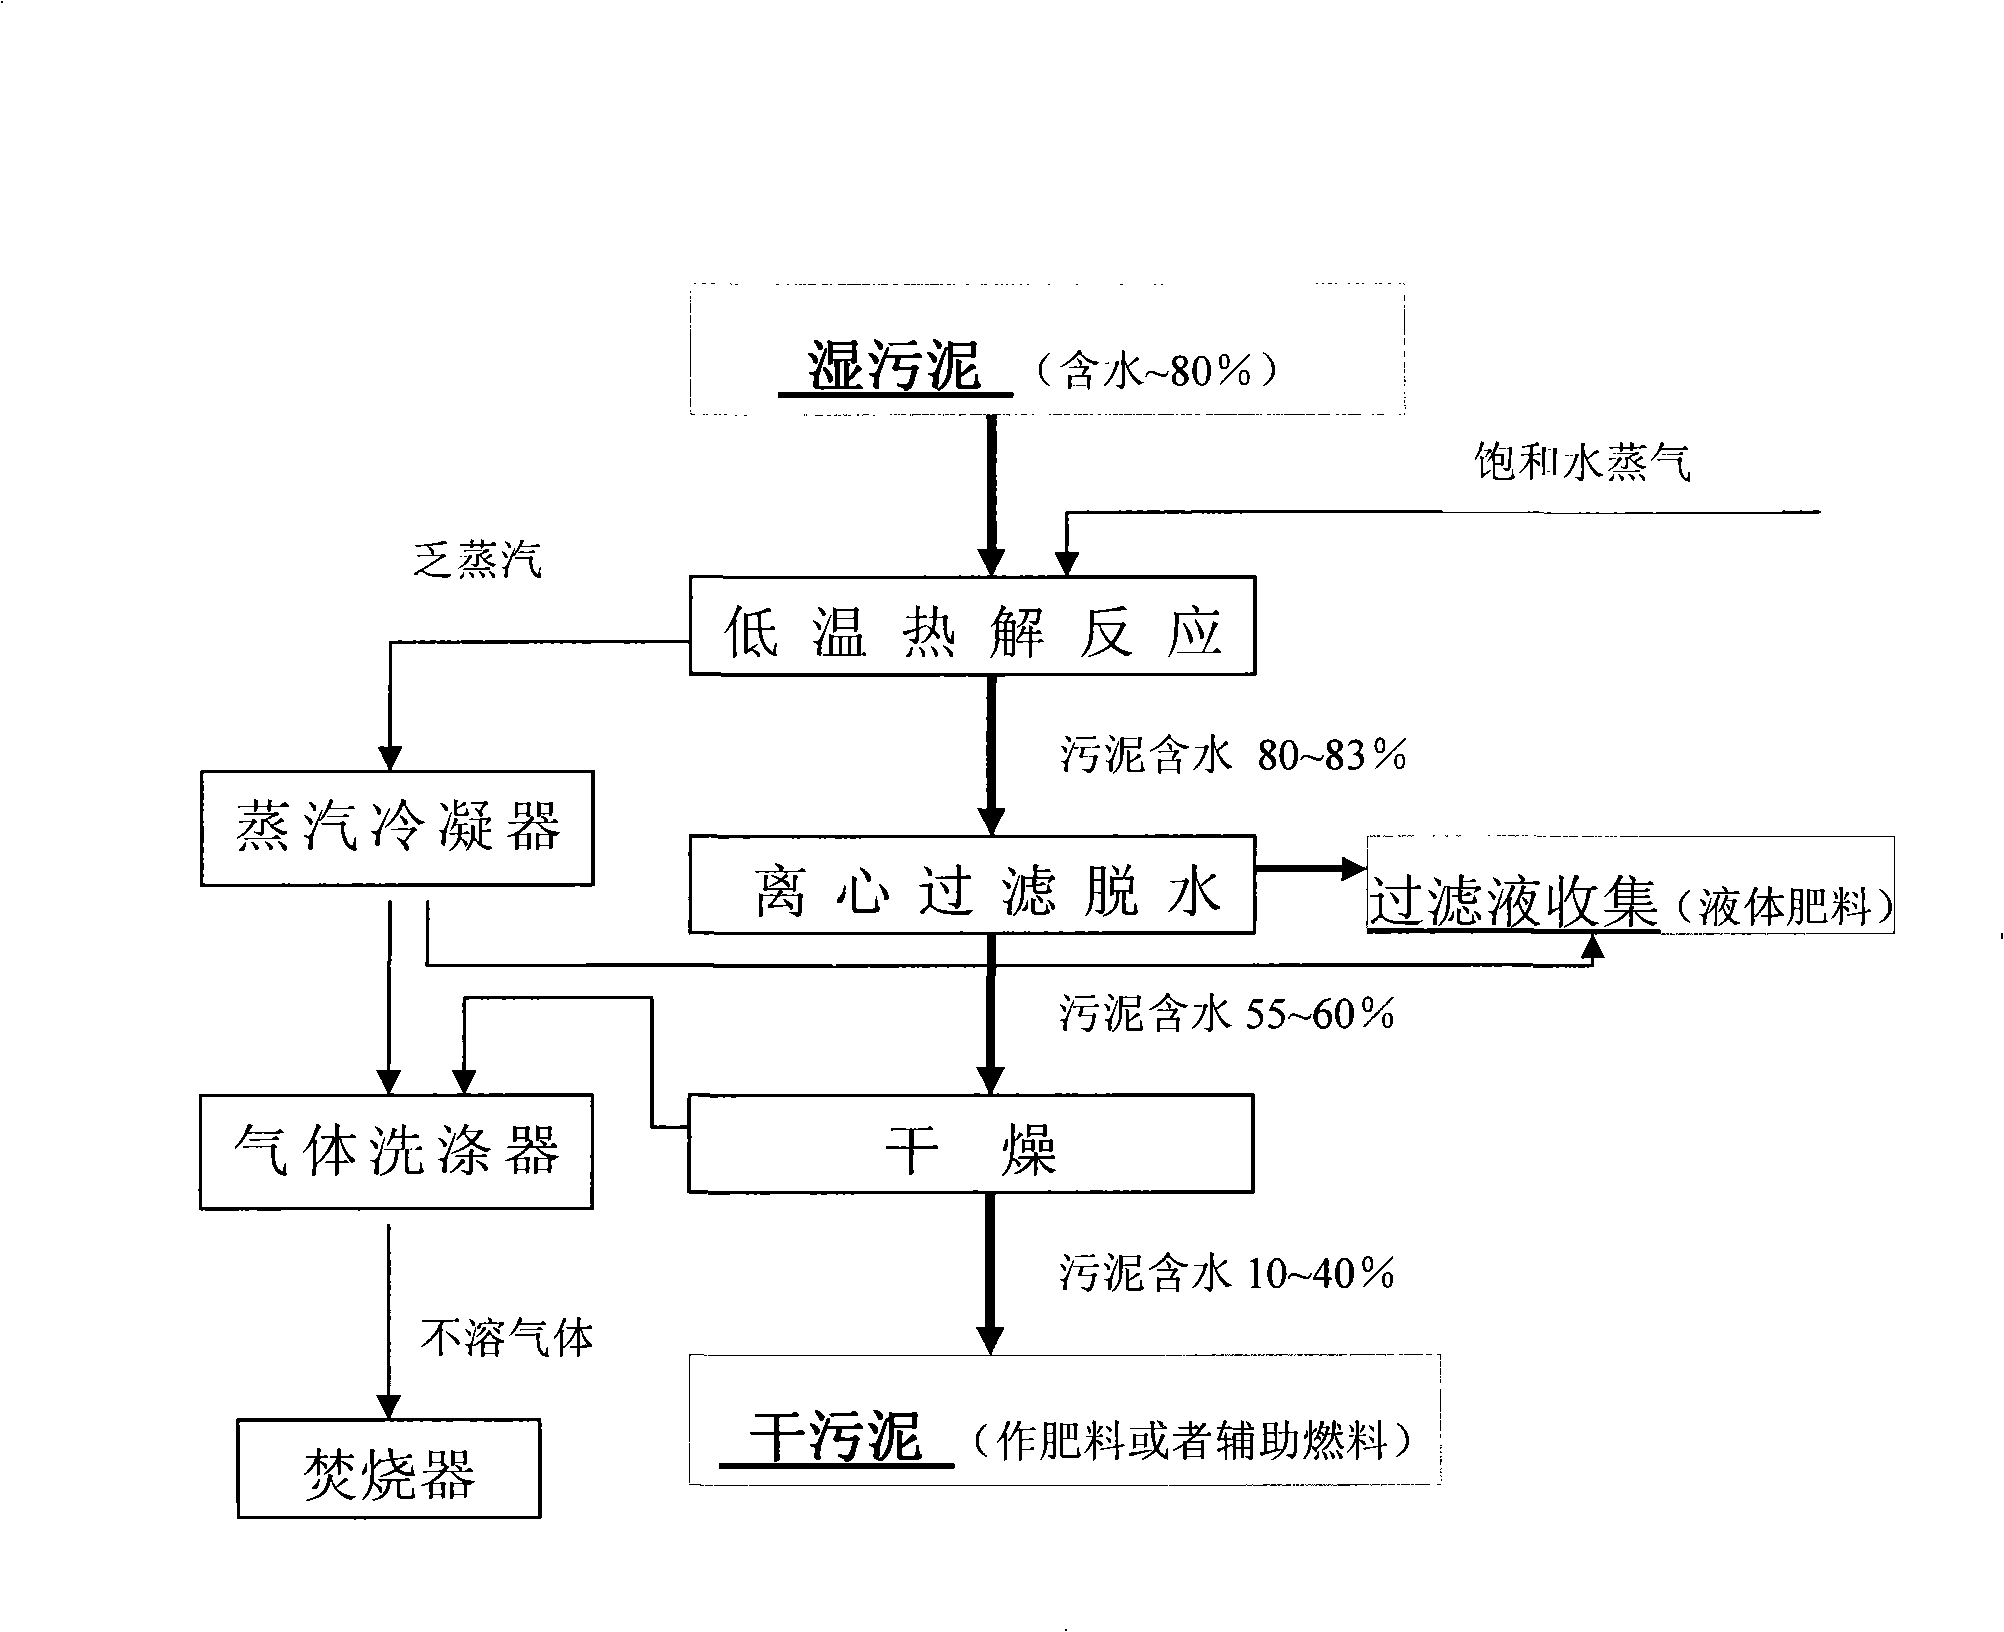 System and process for anhydration treatment of wet sludge